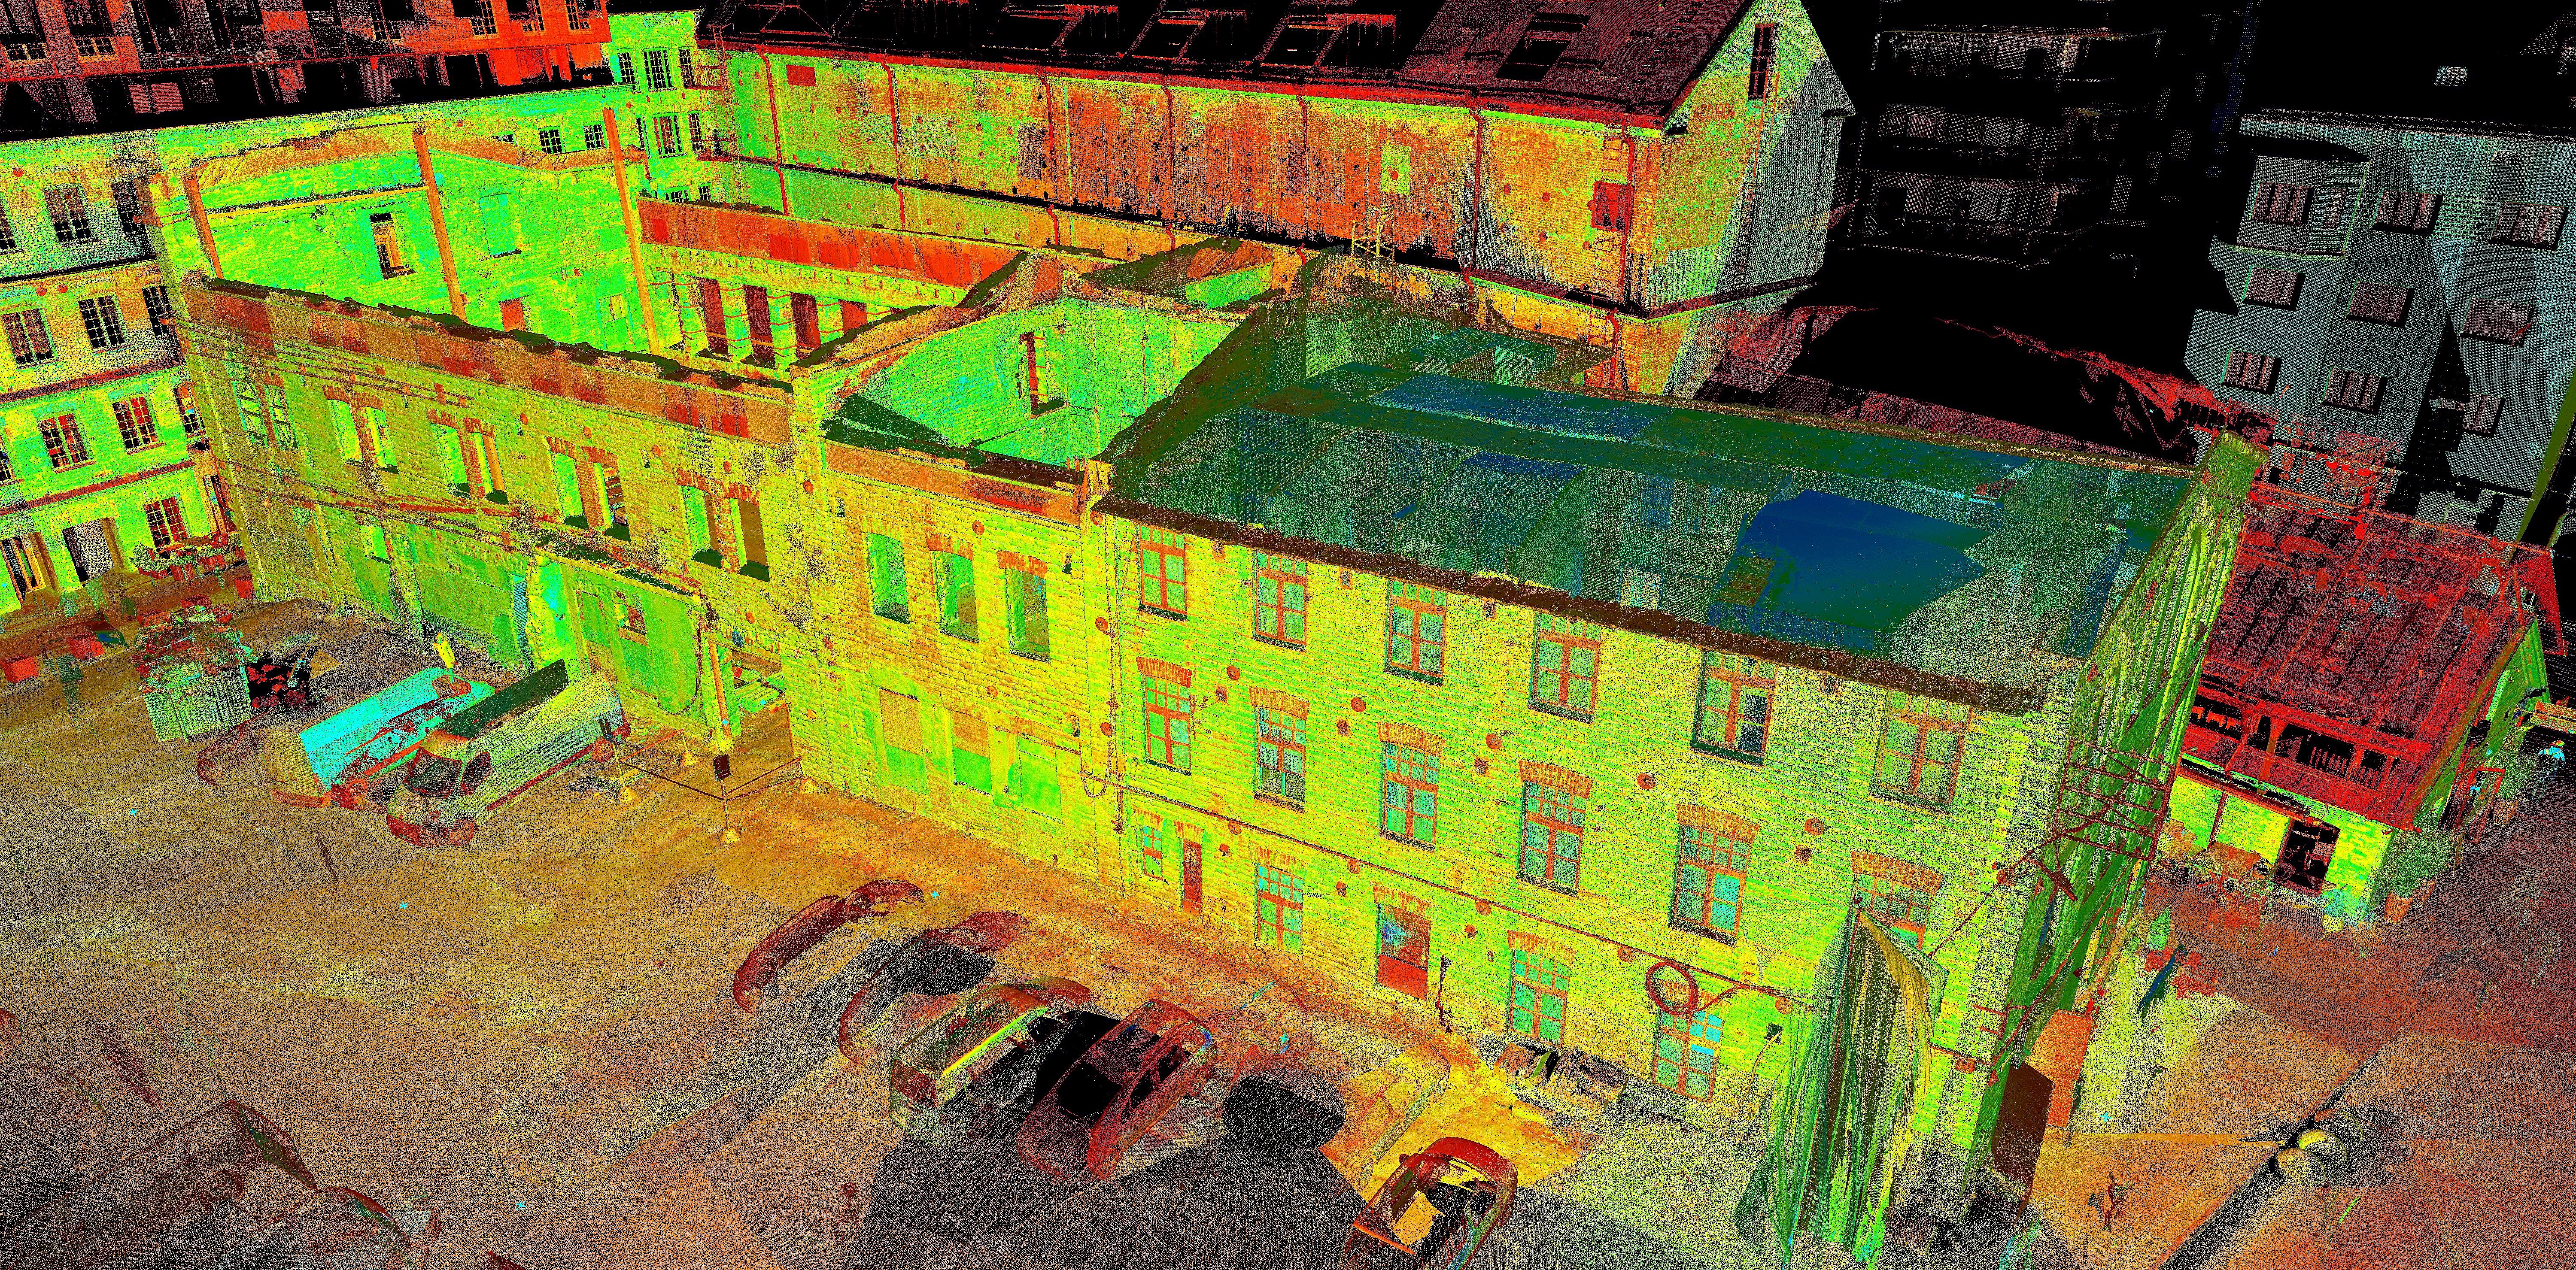 Laser scanning of the old industrial buildings in Rotermanni 6 Tallinn, Estonia